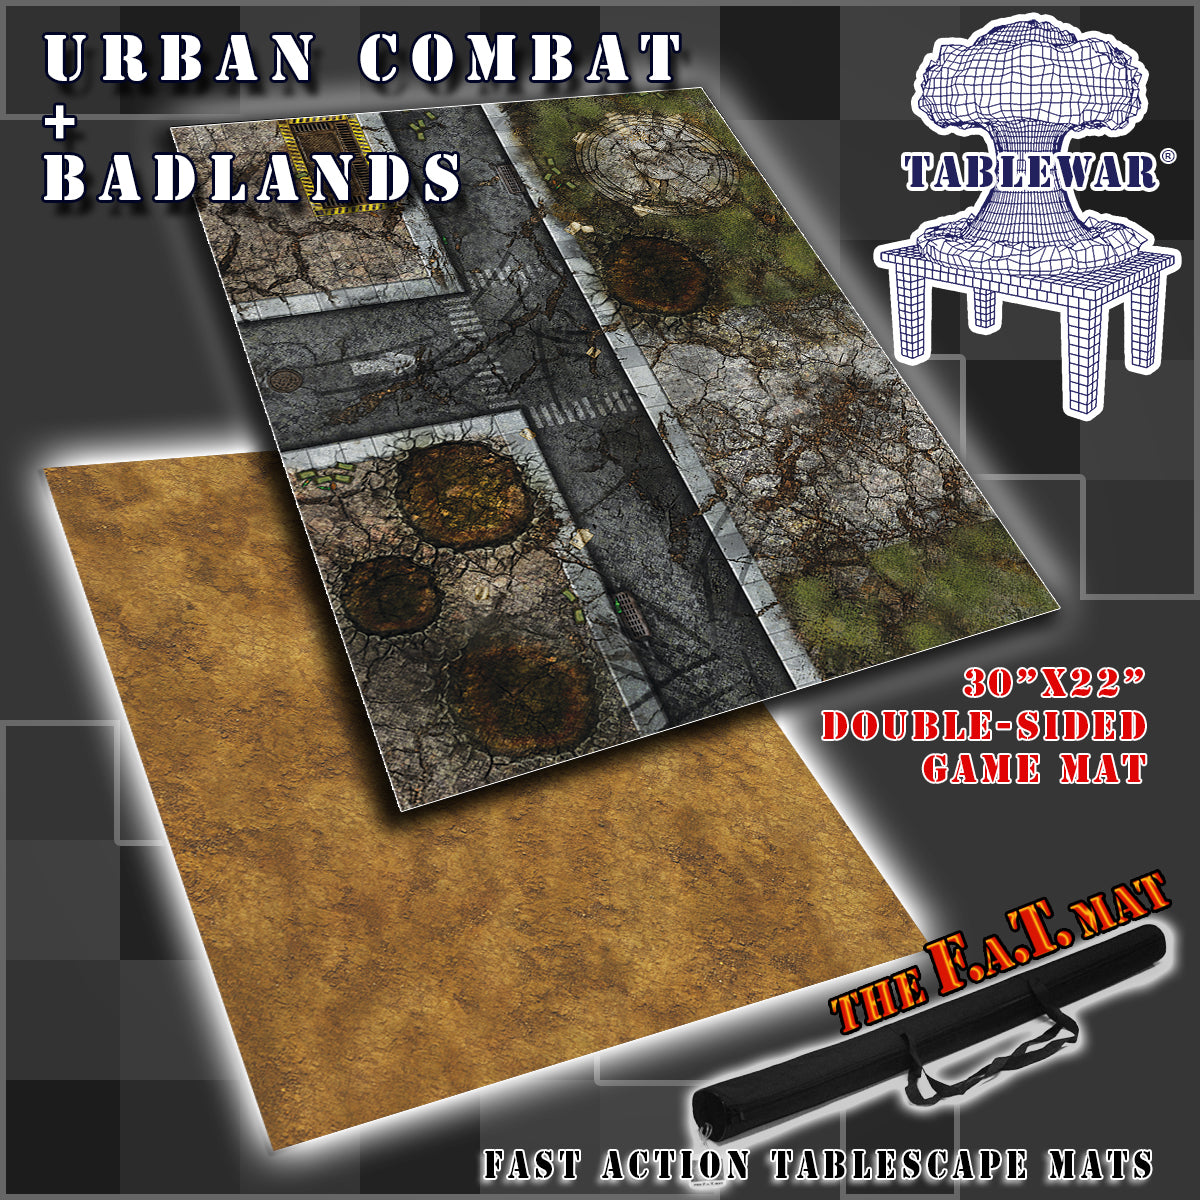 Tablewar 30x22" Double Sided 'Urban Combat' + 'Badlands' F.A.T. Mat Gaming Mat | Eastridge Sports Cards & Games